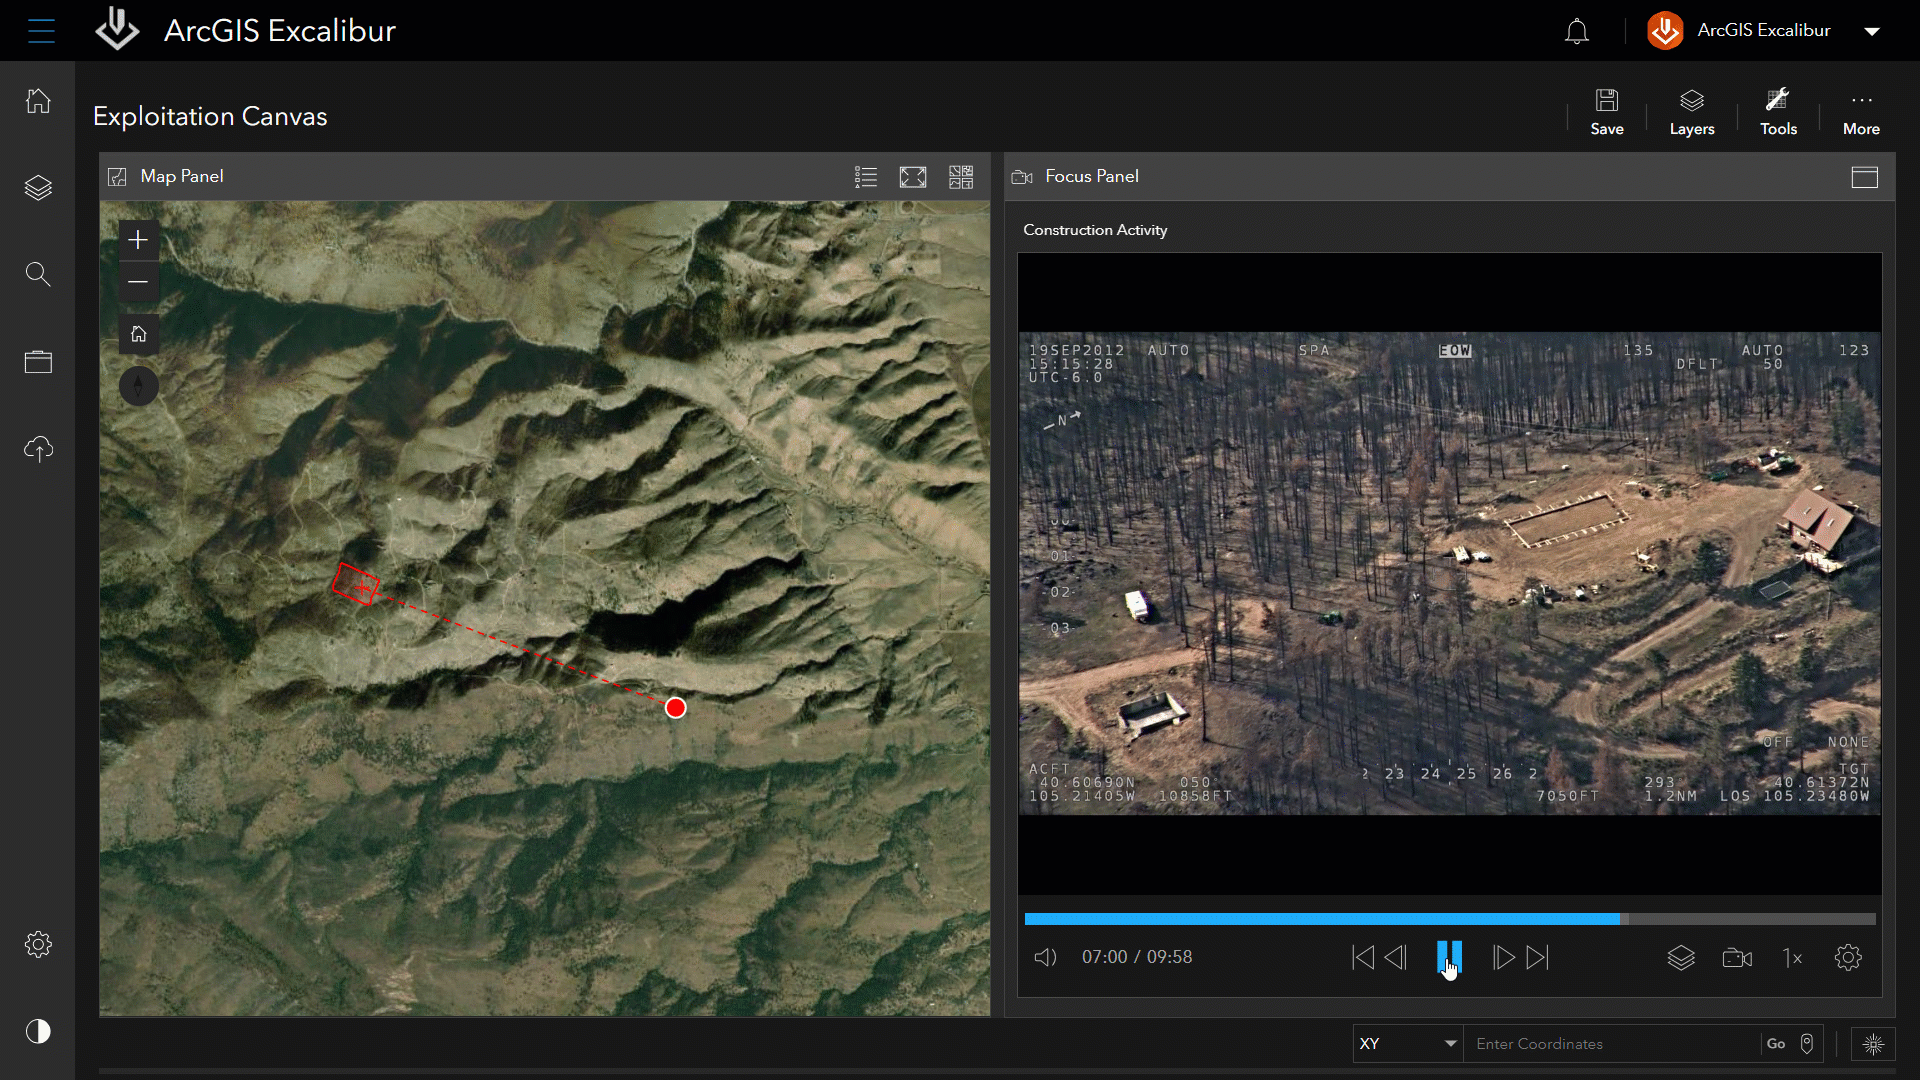 Interface of ArcGIS Excalibur featuring a land image on the left and a moving video on the right of land and trees